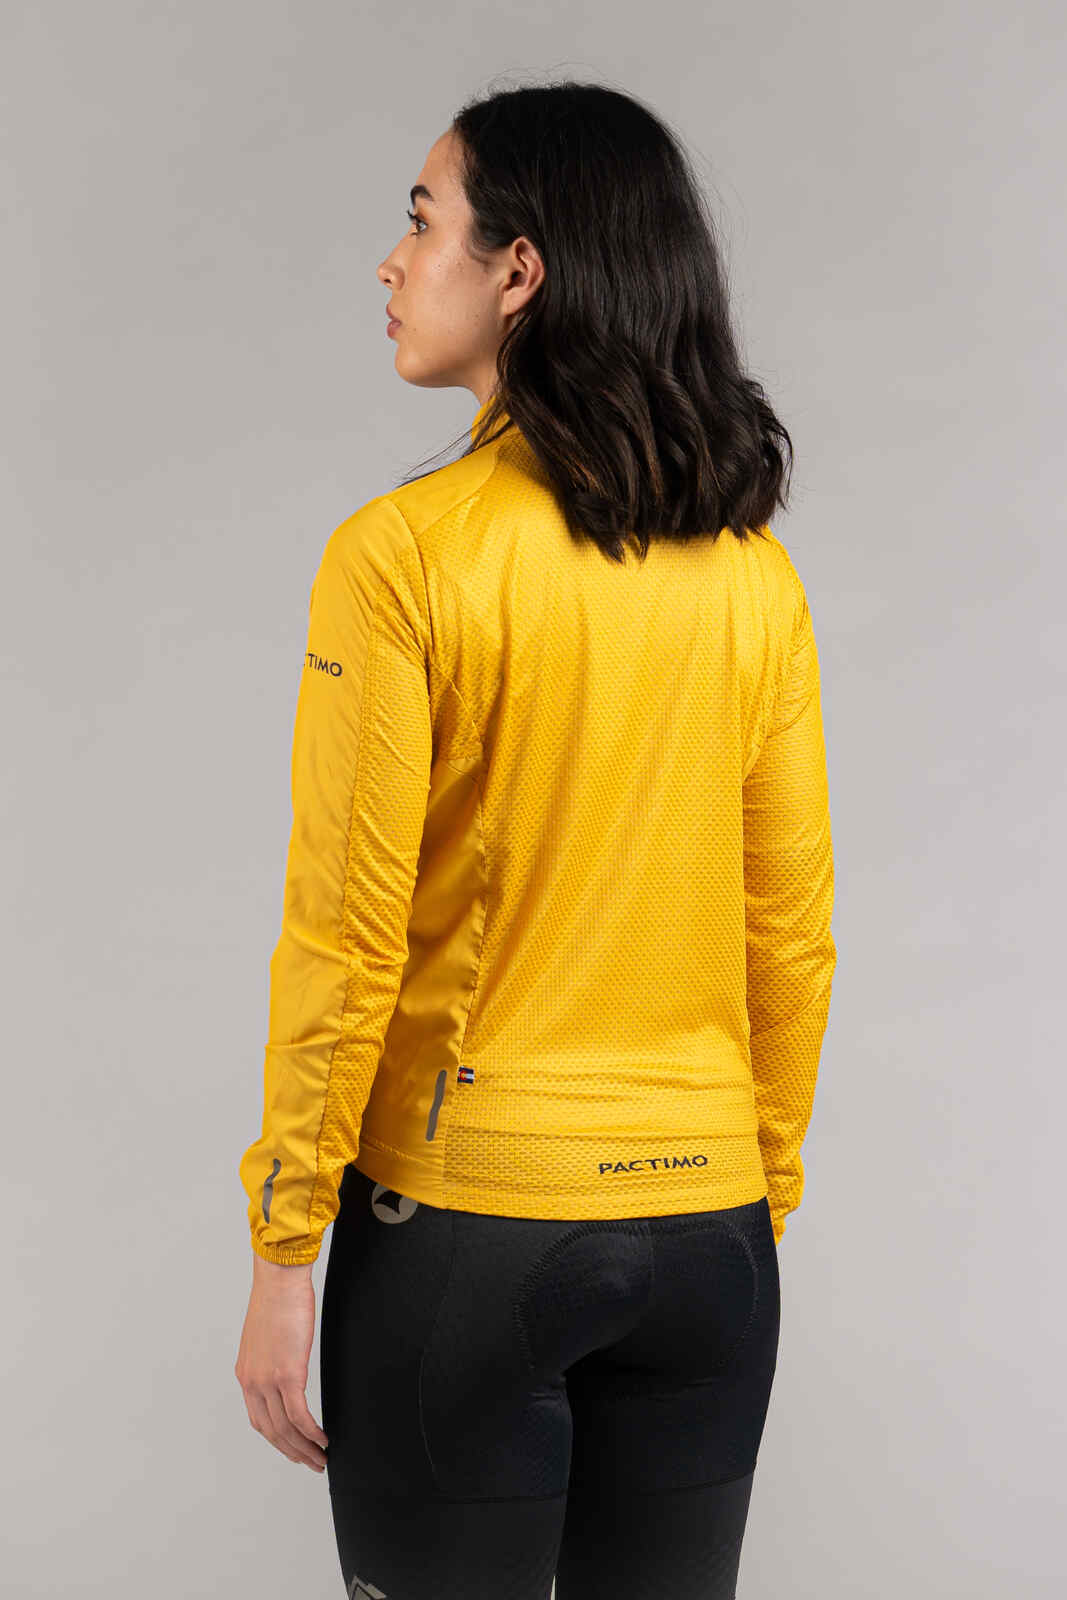 Women's Yellow Packable Cycling Wind Jacket - Back View